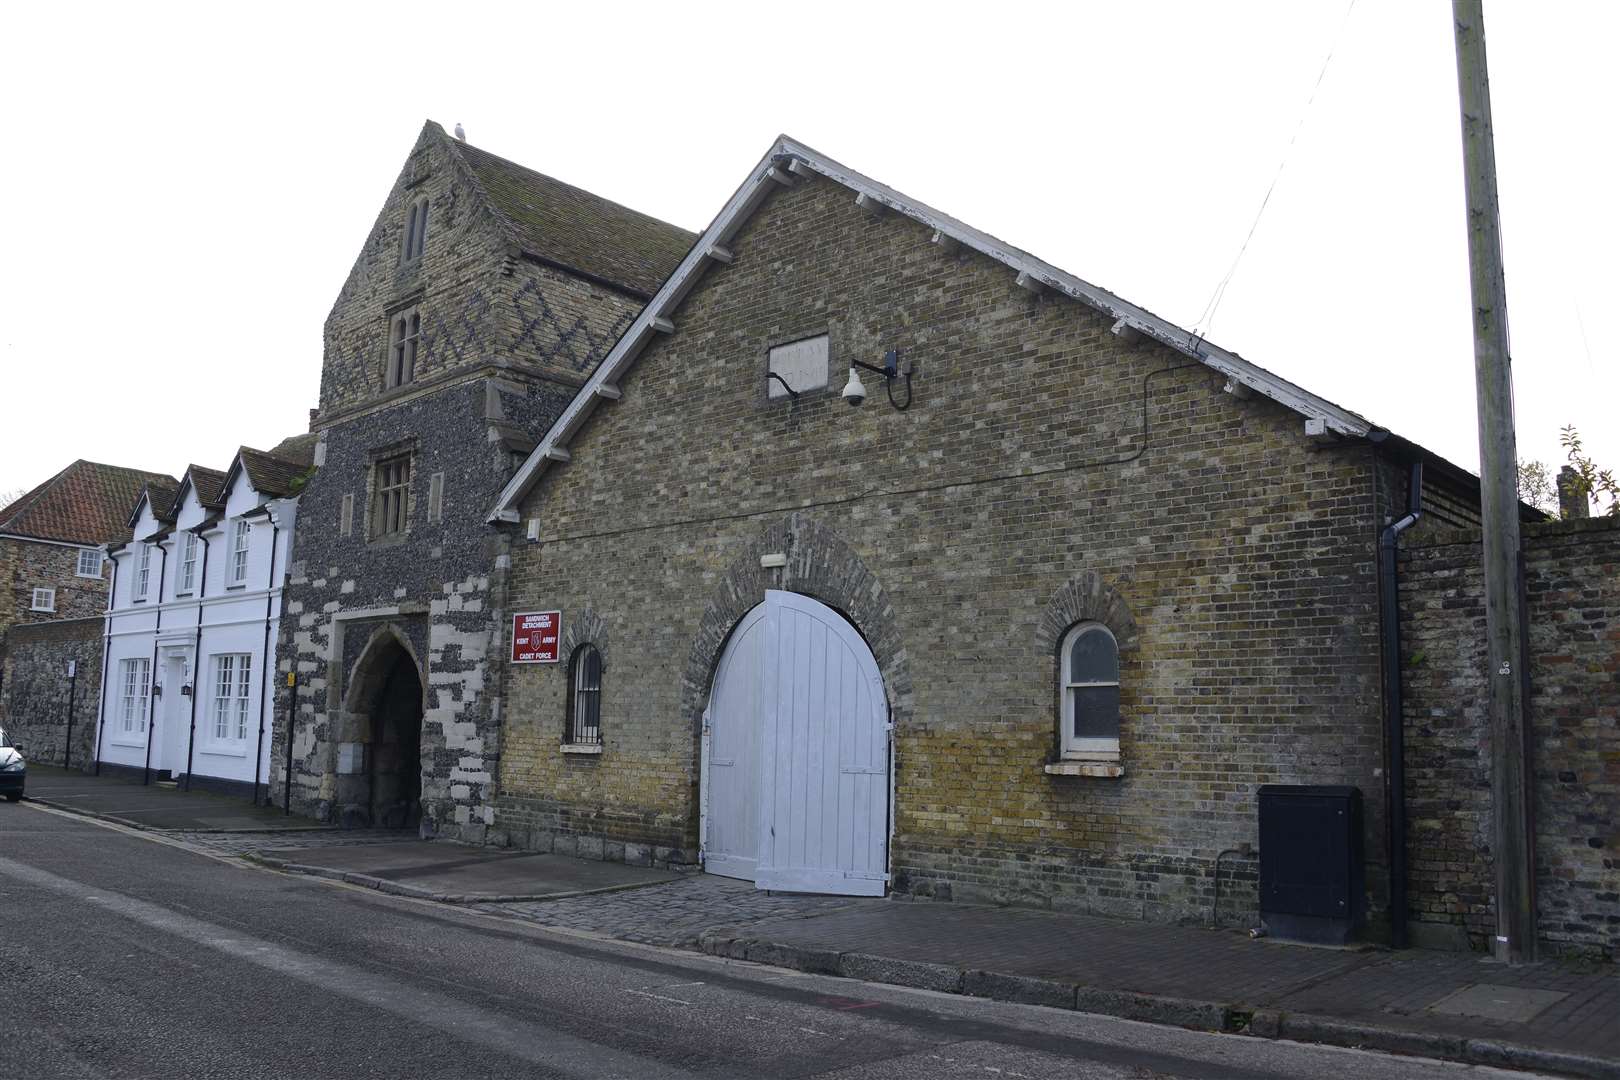 The Drill Hall in Sandwich